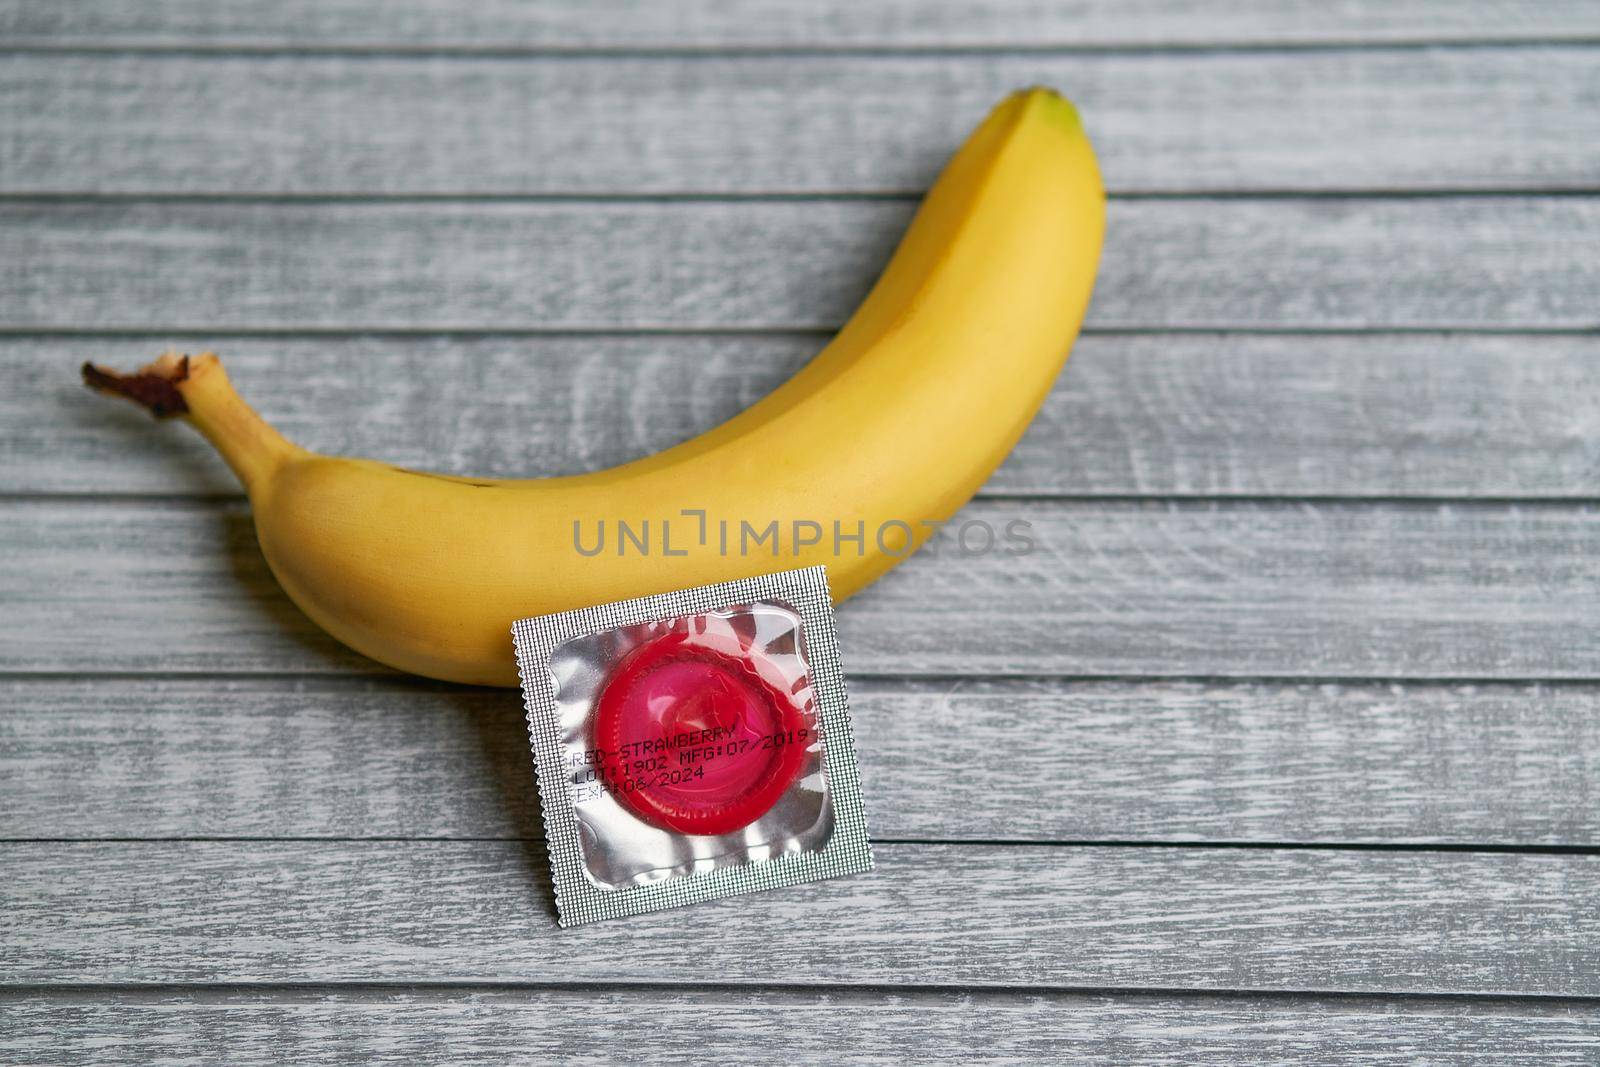 Red Condom and yellow banana lays on a gray wooden background